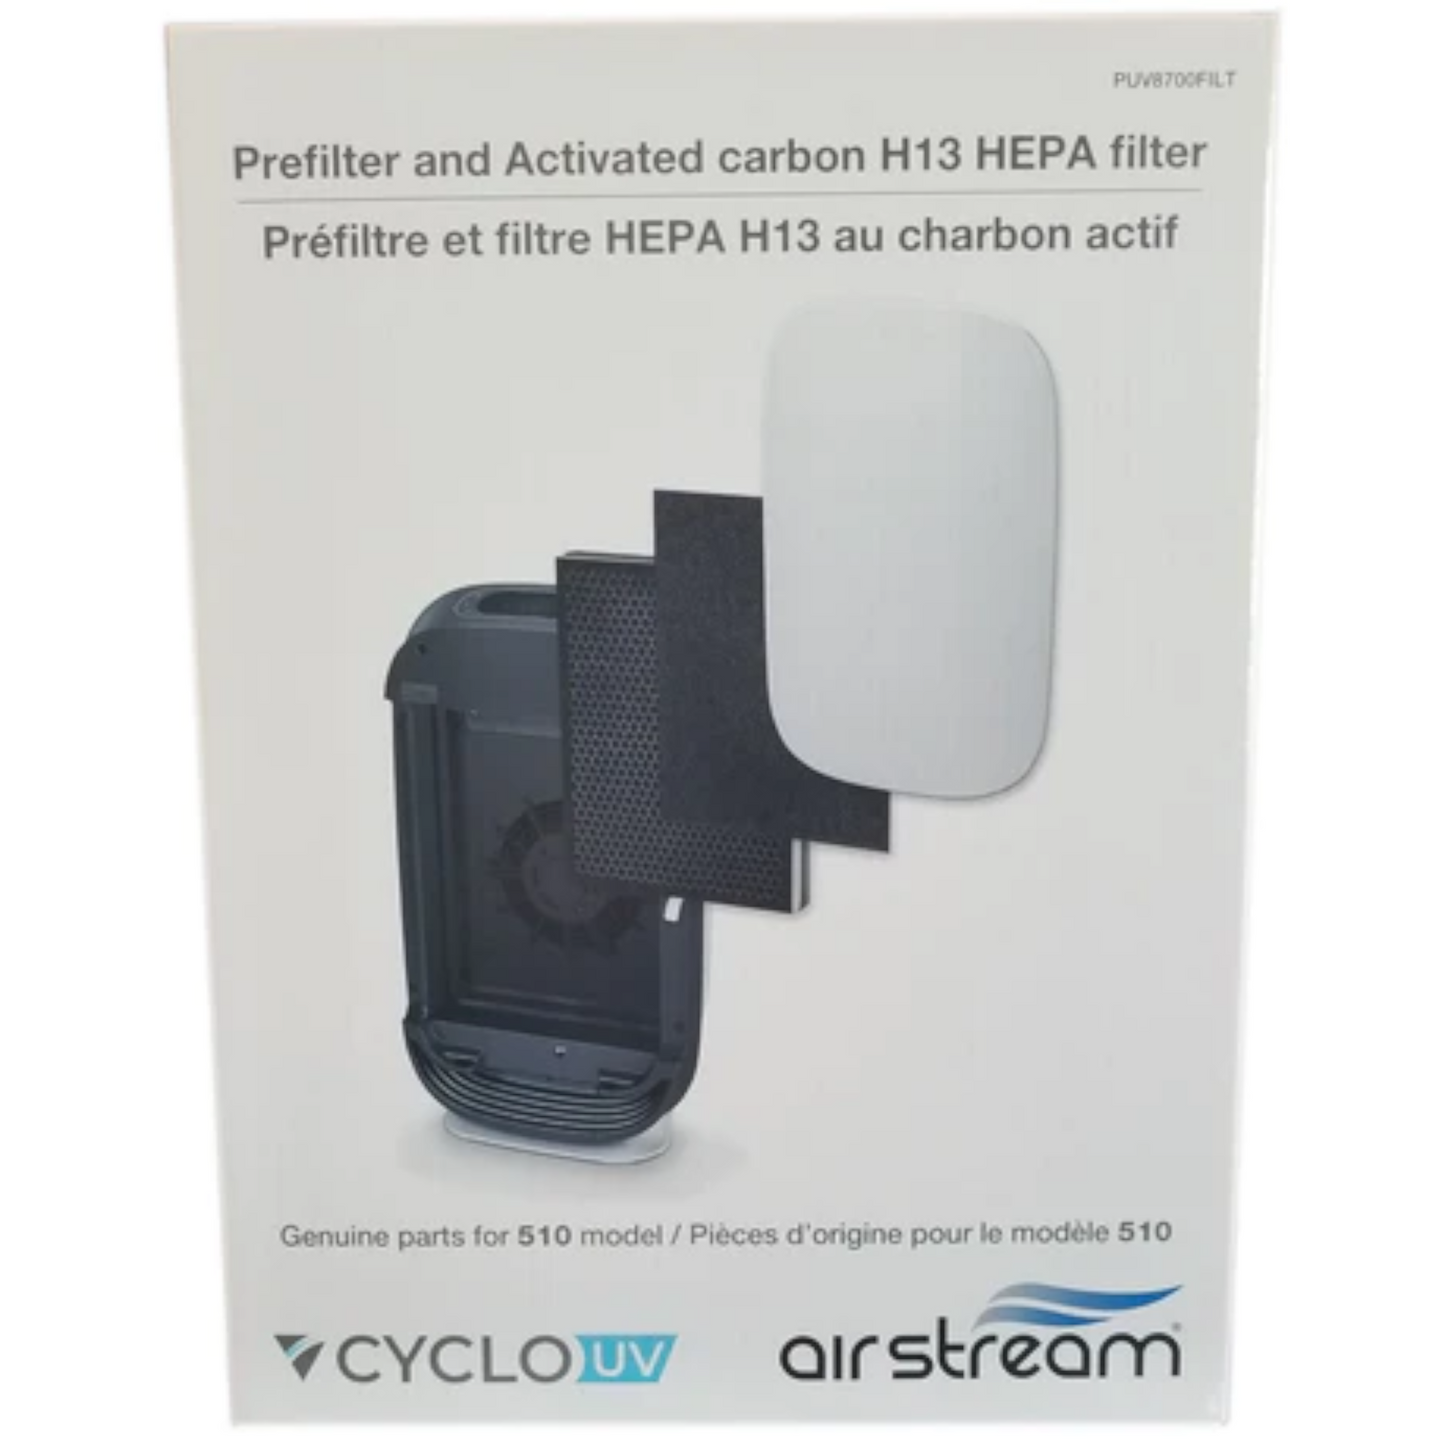 Airstream UV Prefilter & Activated Carbon H13 HEPA Filter for 510C UVC Air Purifier